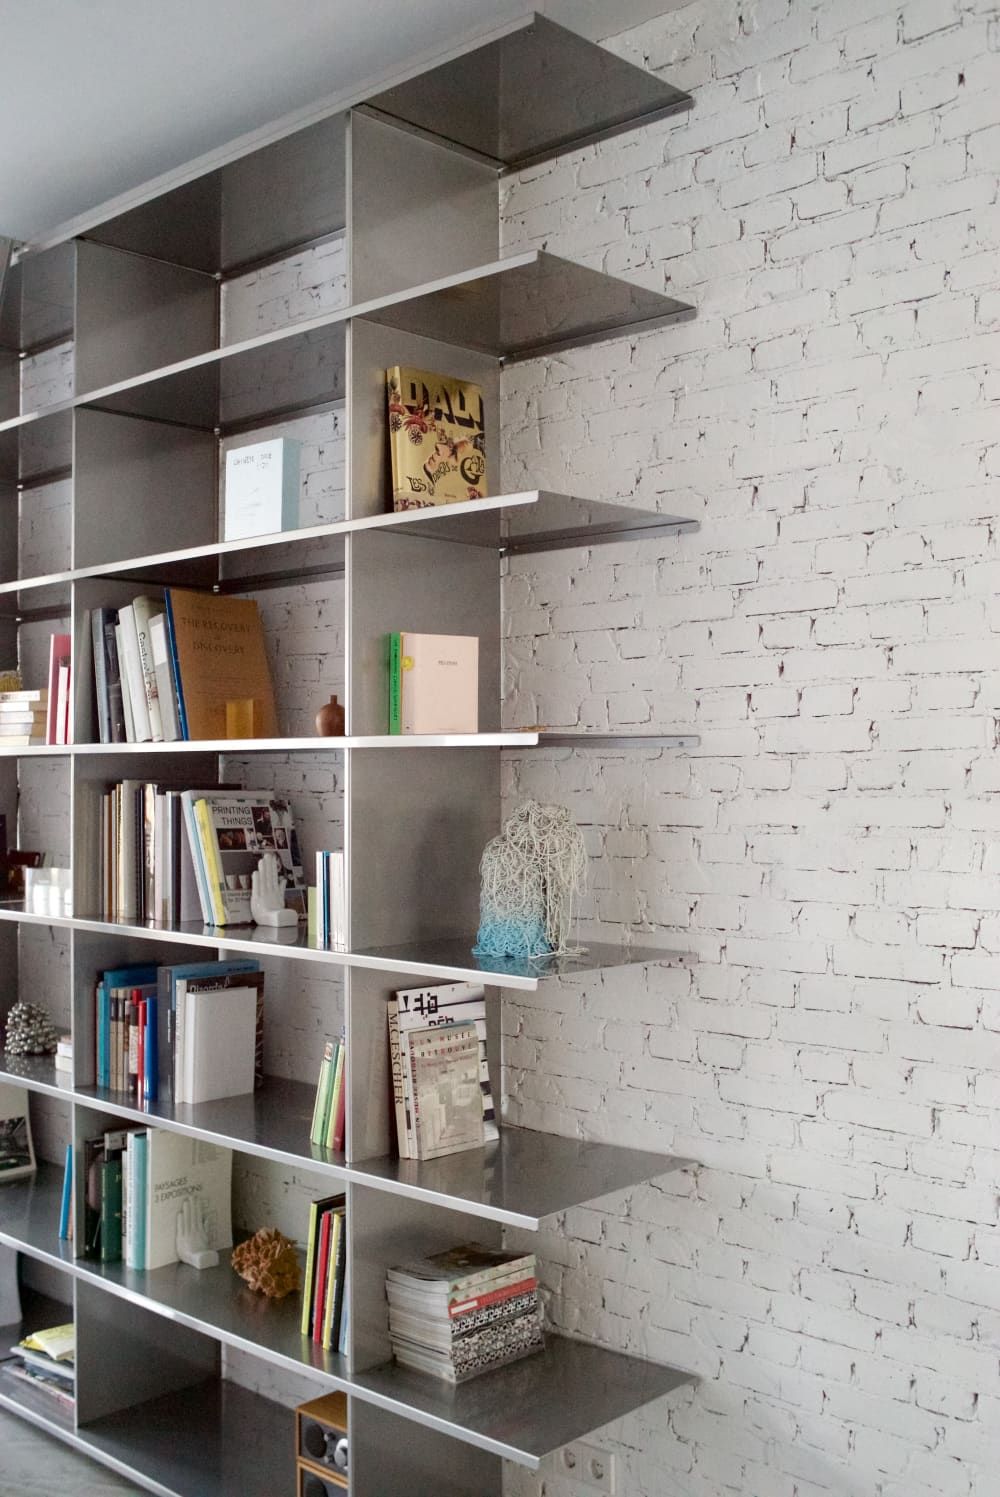 Benefits of Modular Shelving System for Customizing Your Space